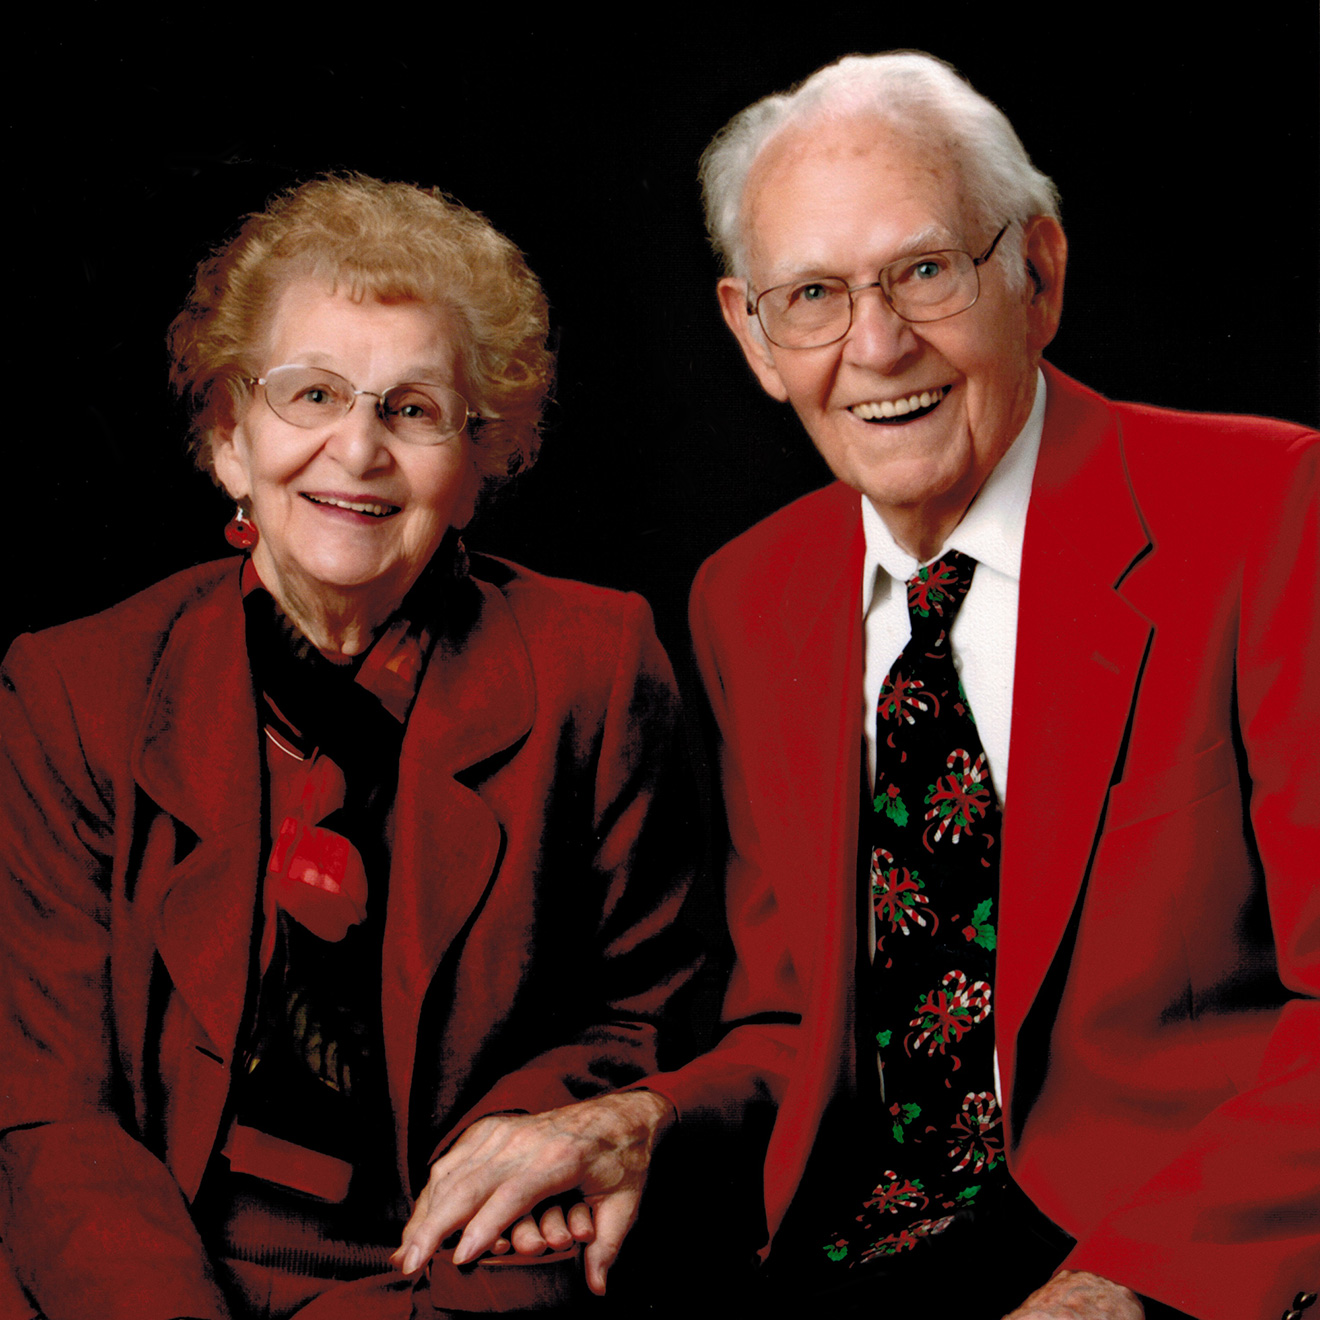 H.G. McCullough Designers - Harry and Betty McCullough